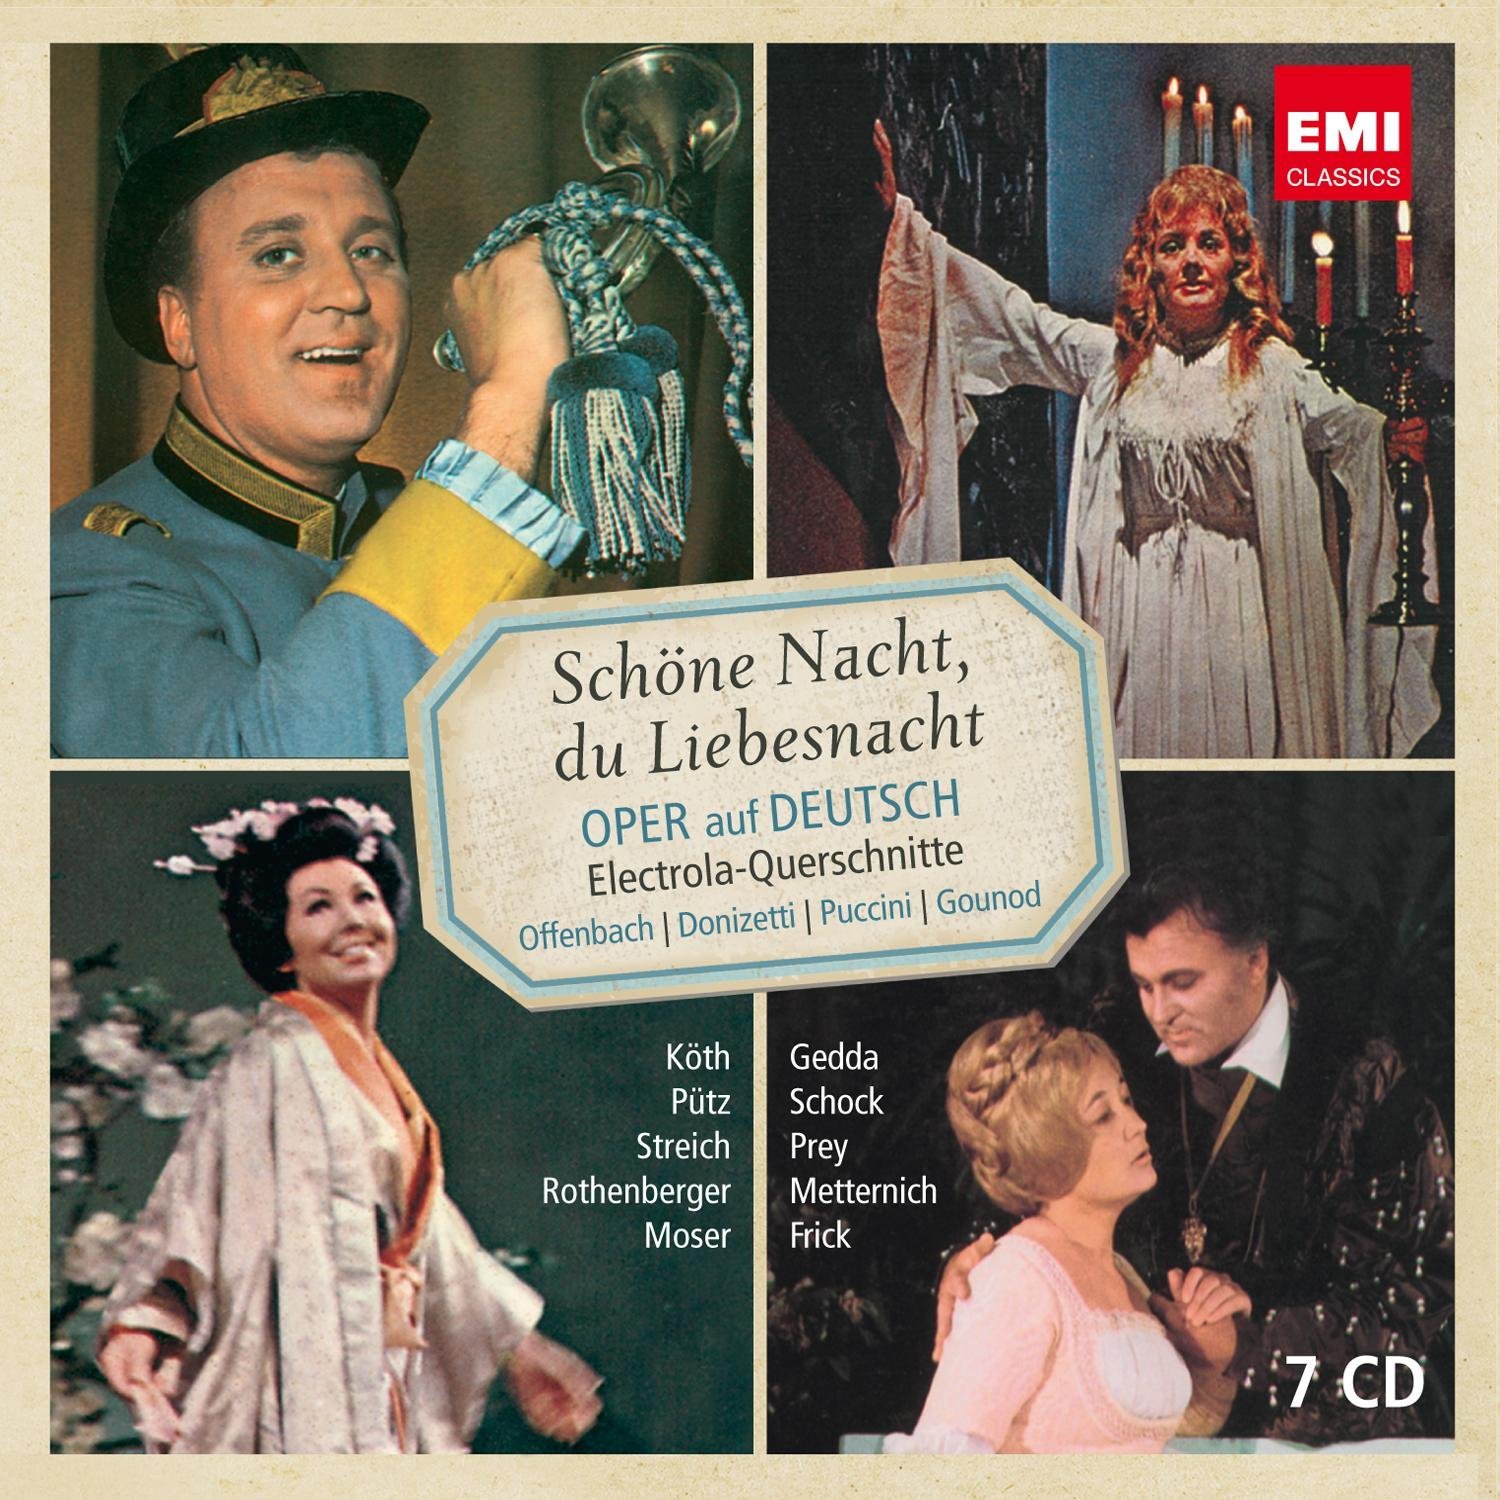 New Opera Series box-set, sung in German from the Italian and French repertoire on EMI, Schone Nacht, Du Liebesnacht